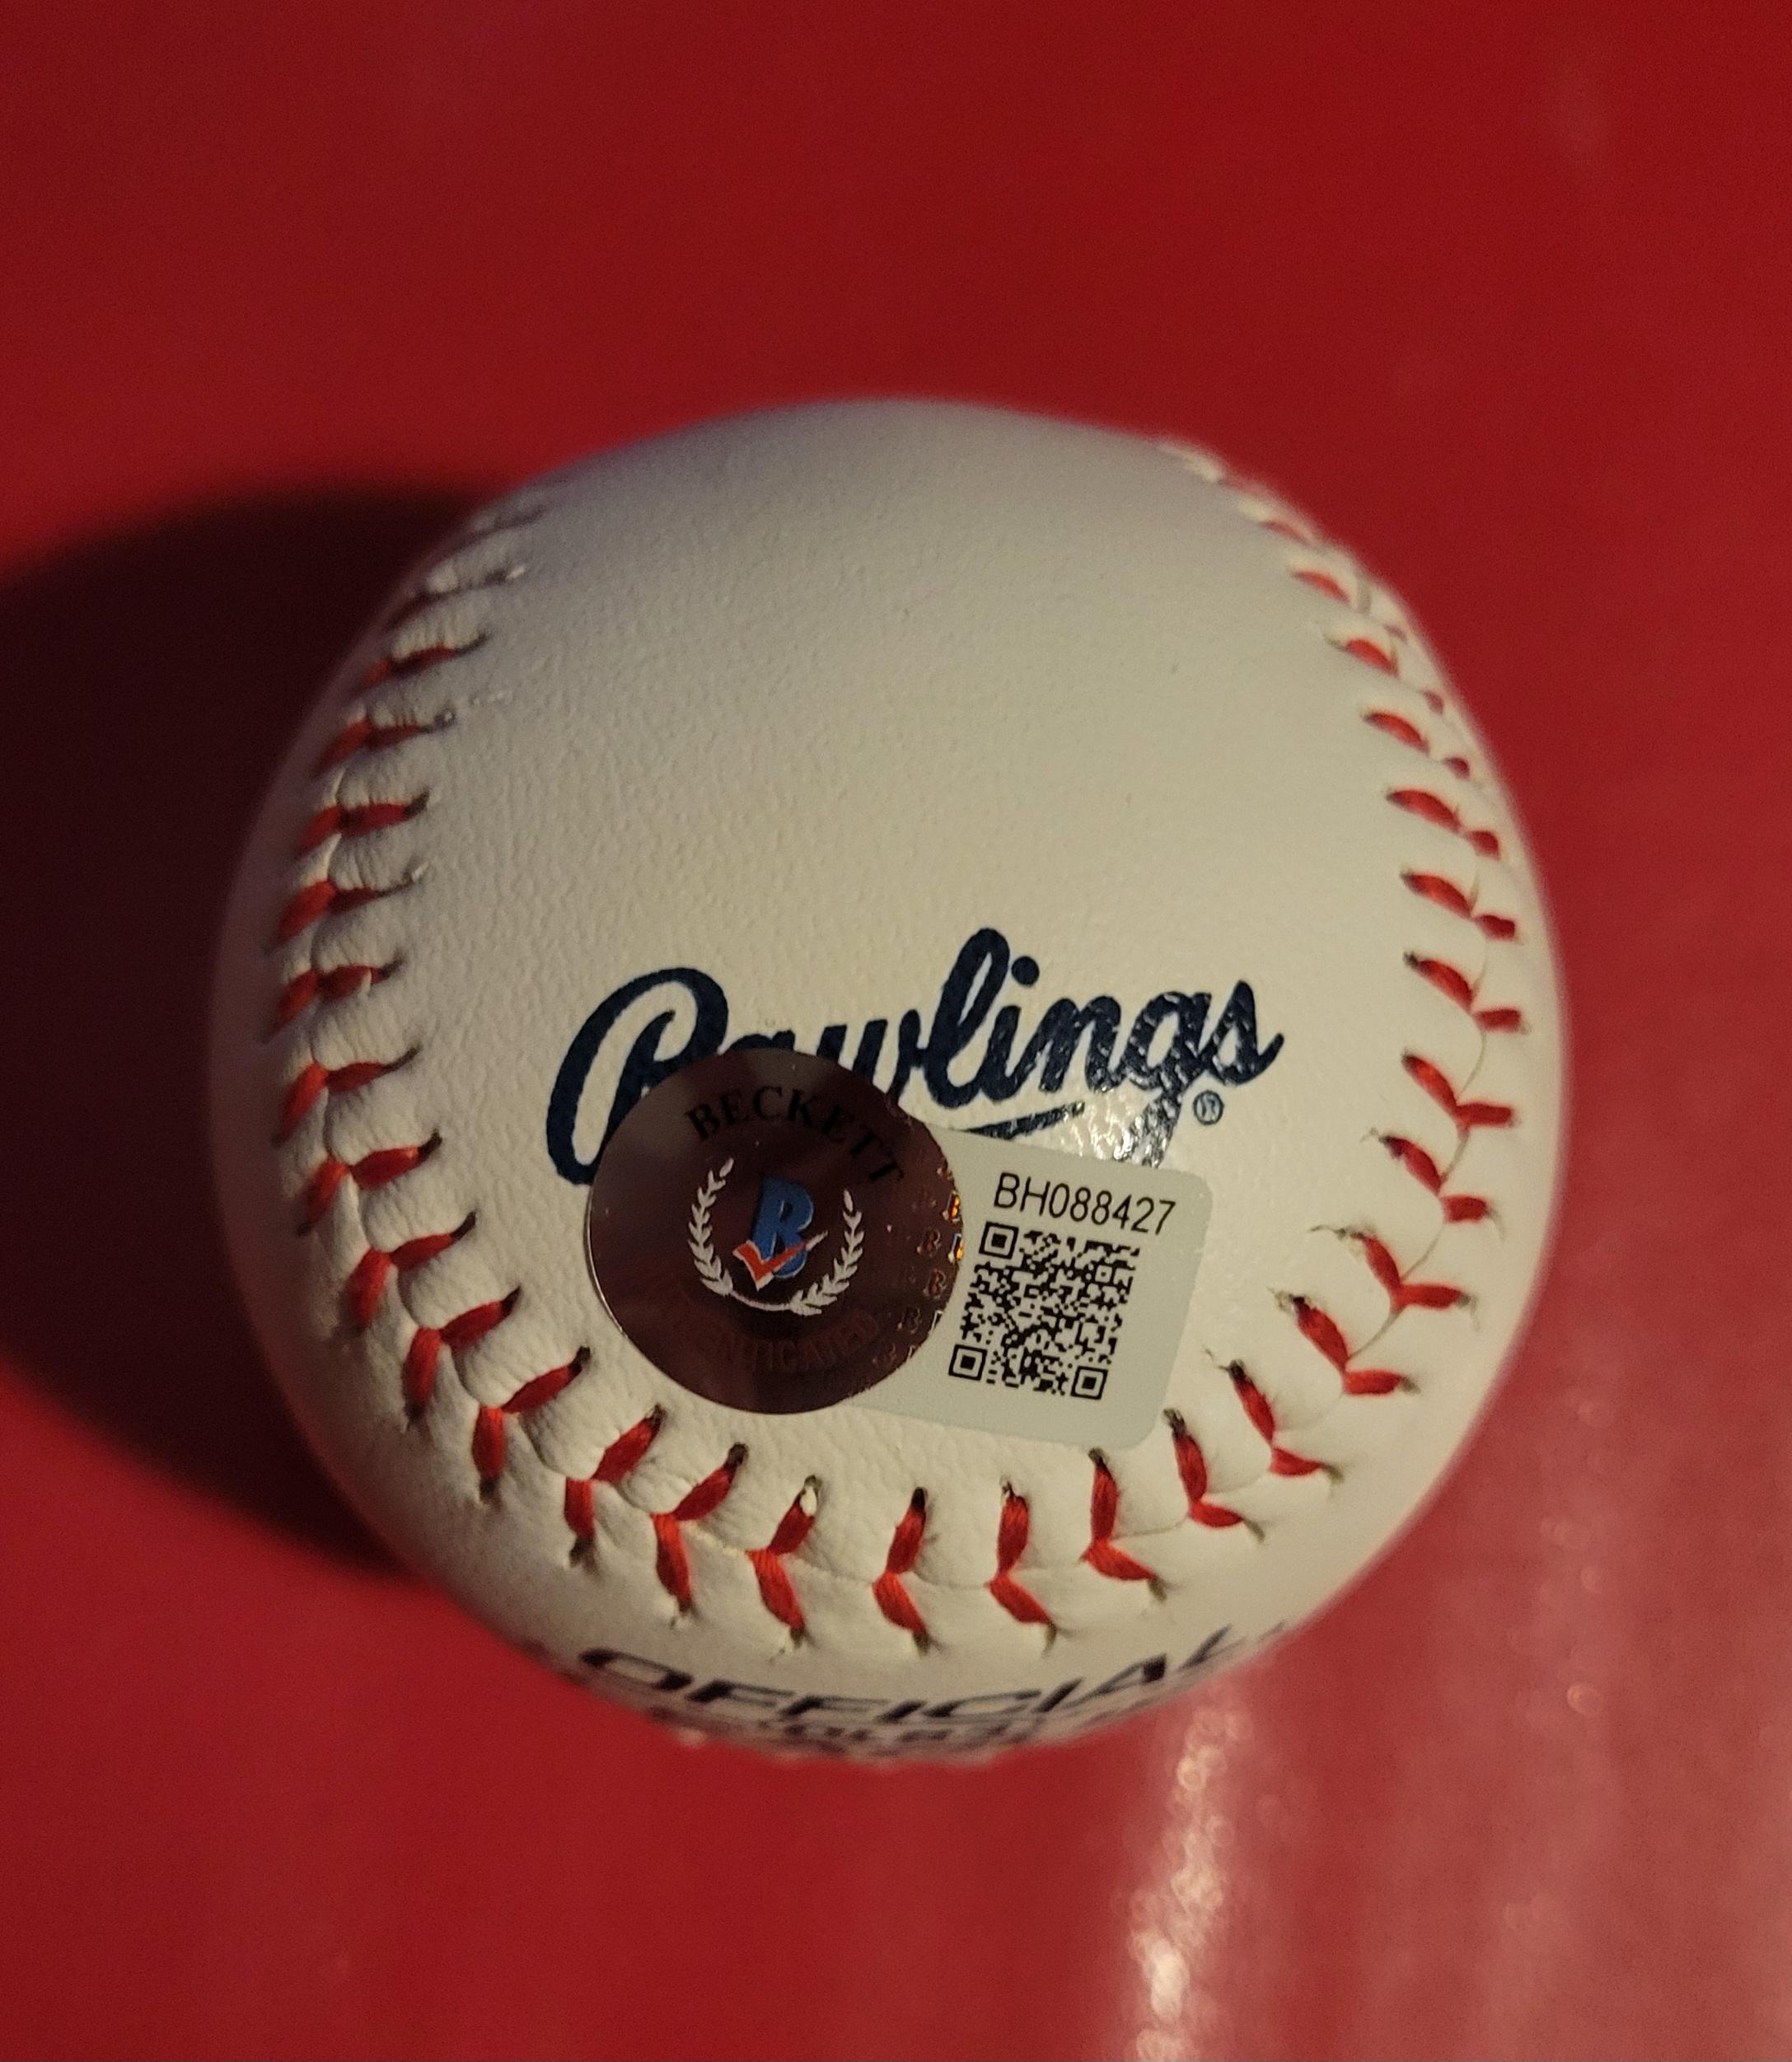 Eric Gagne Los Angeles Dodgers Autographed & Inscribed Rawlings Baseball Beckett Hologram